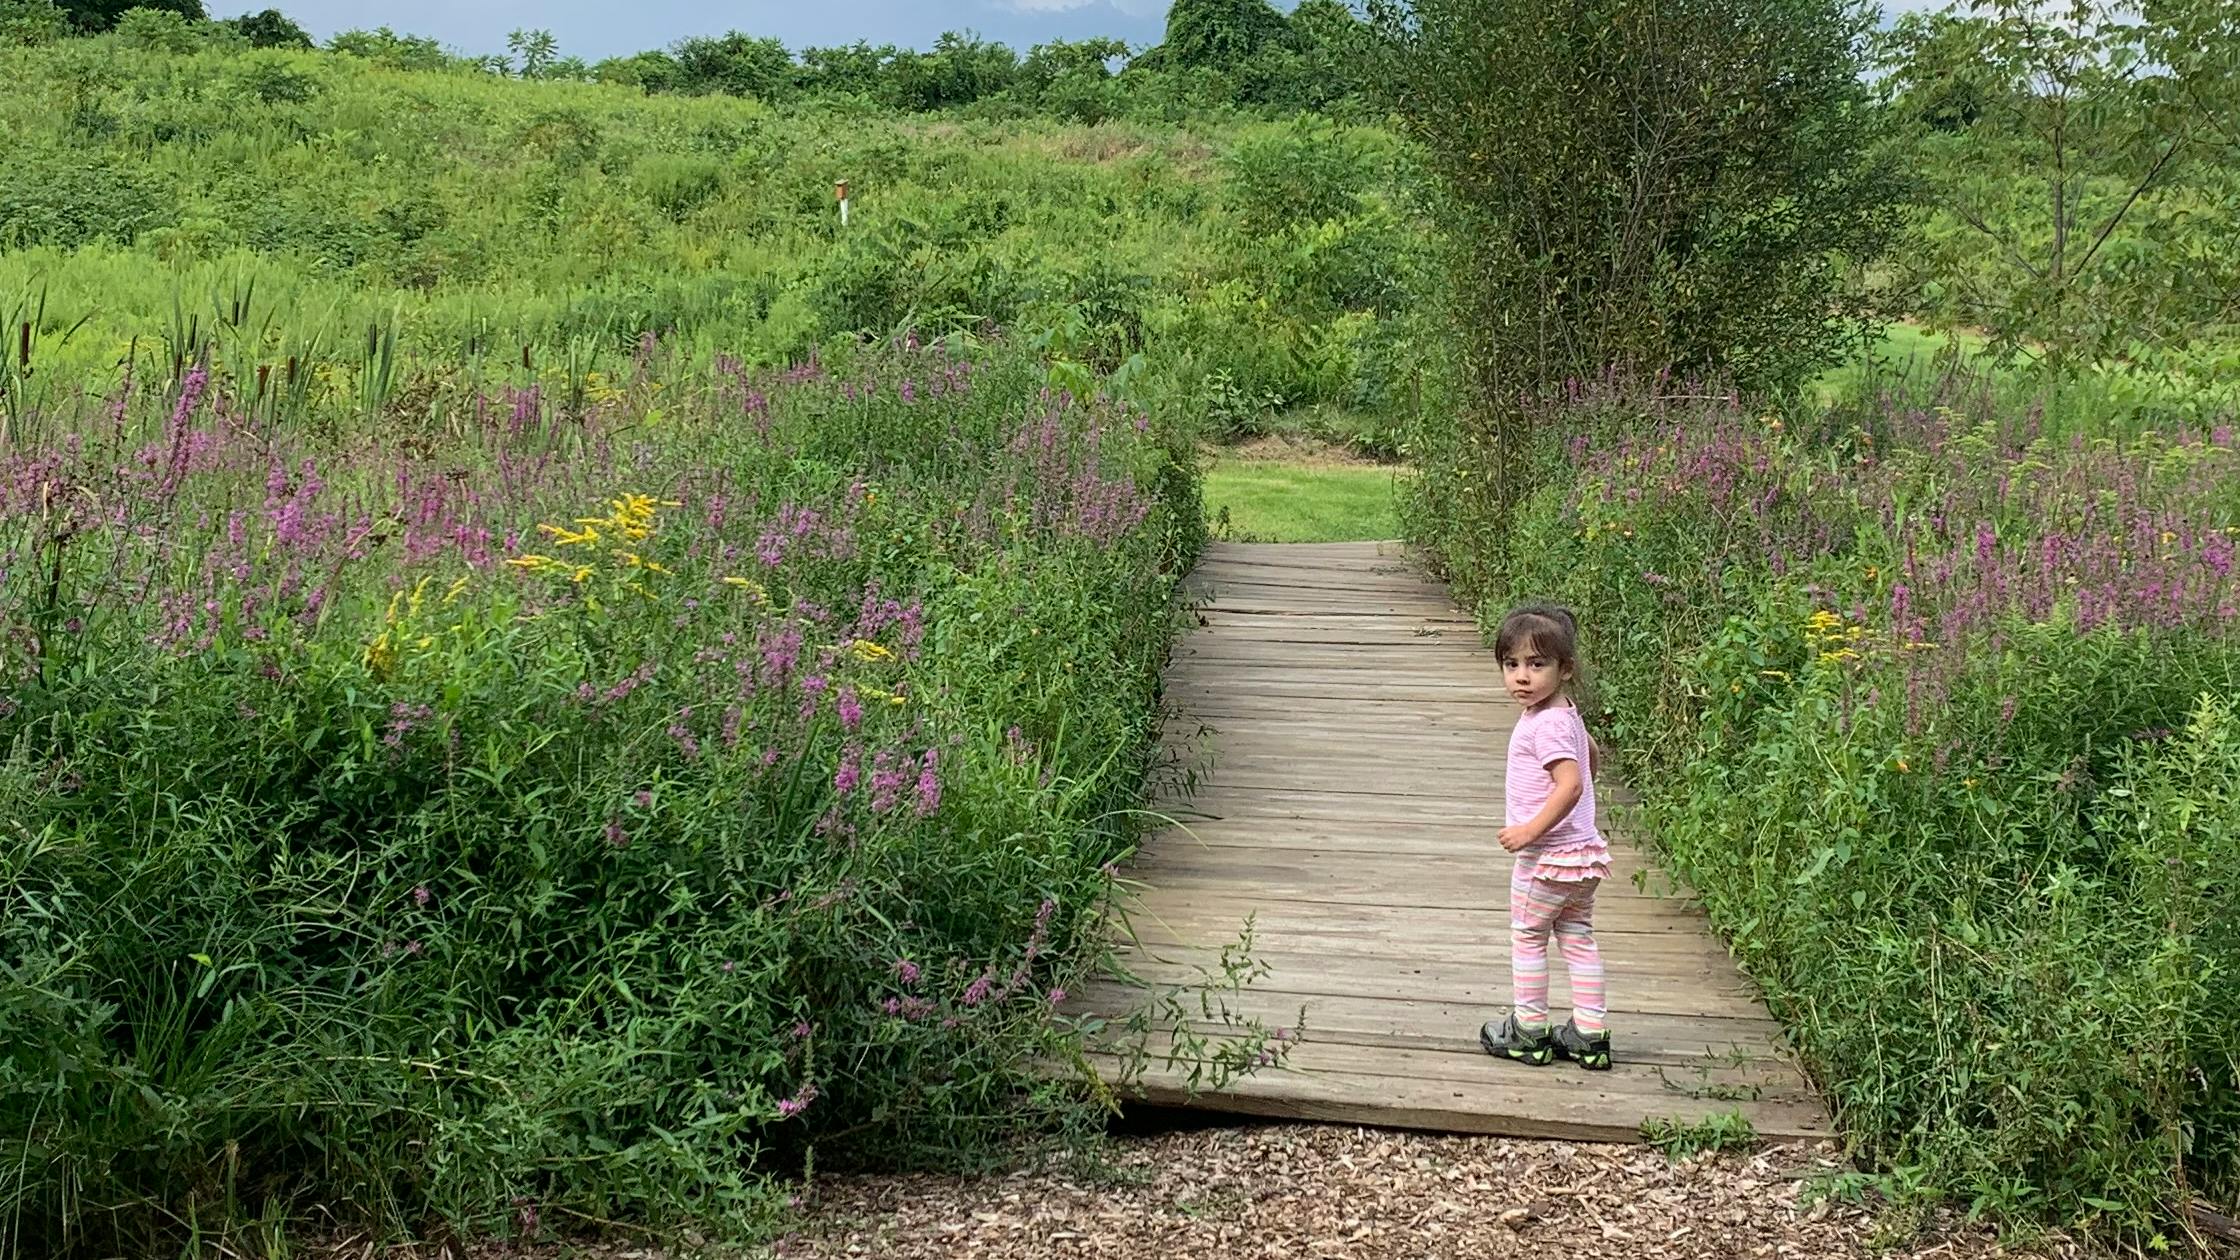 A little girl in pink looks back at the camera while walking on a boardwalk between tall flowers